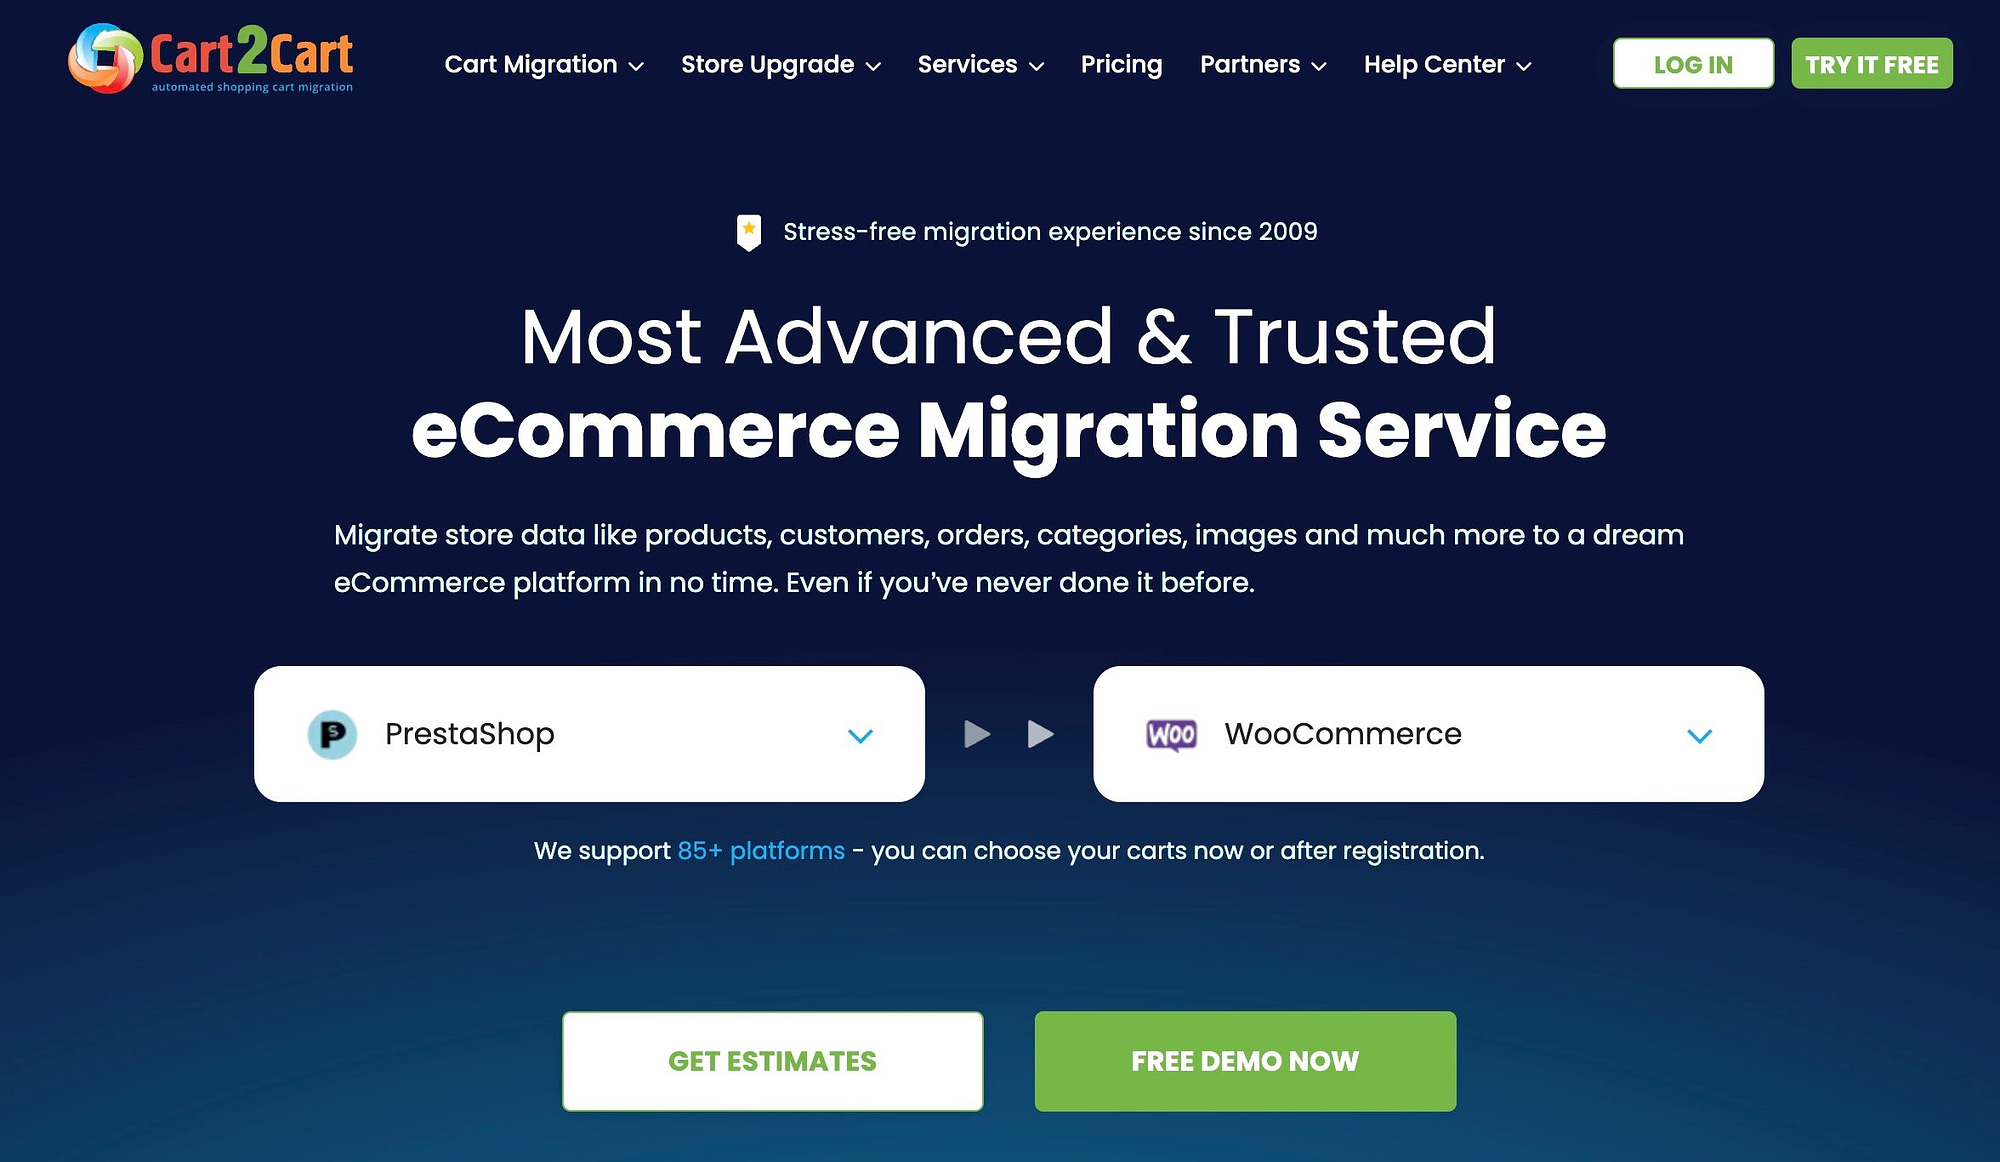 Cart2Cart is a fast and affordable app for the PrestaShop to WooCommerce migration.